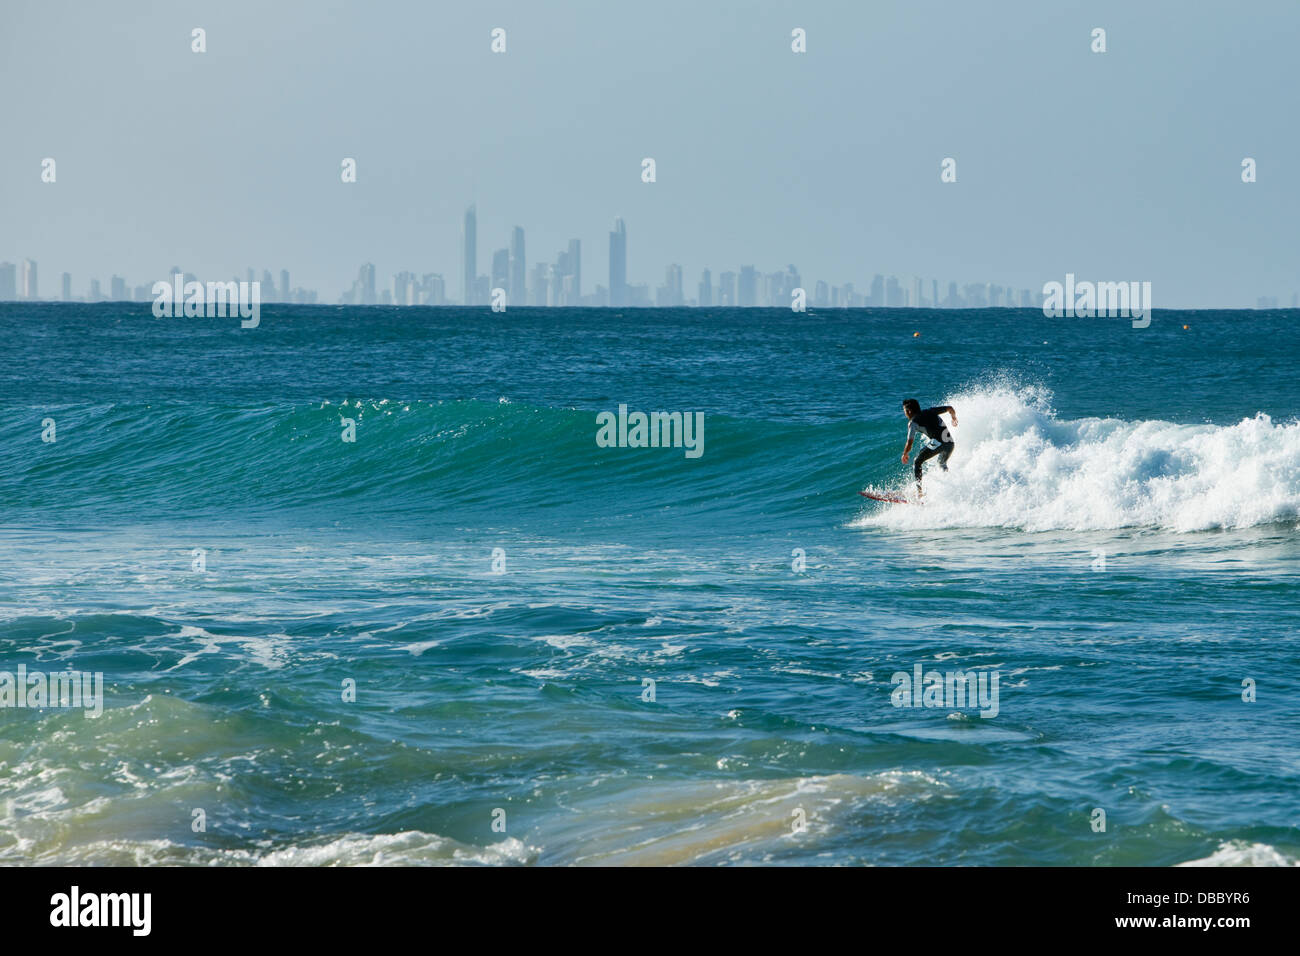 Surfer riding a wave with Surfers Paradise skyline in background. Rainbow Bay, Coolangatta, Gold Coast, Queensland, Australia Stock Photo